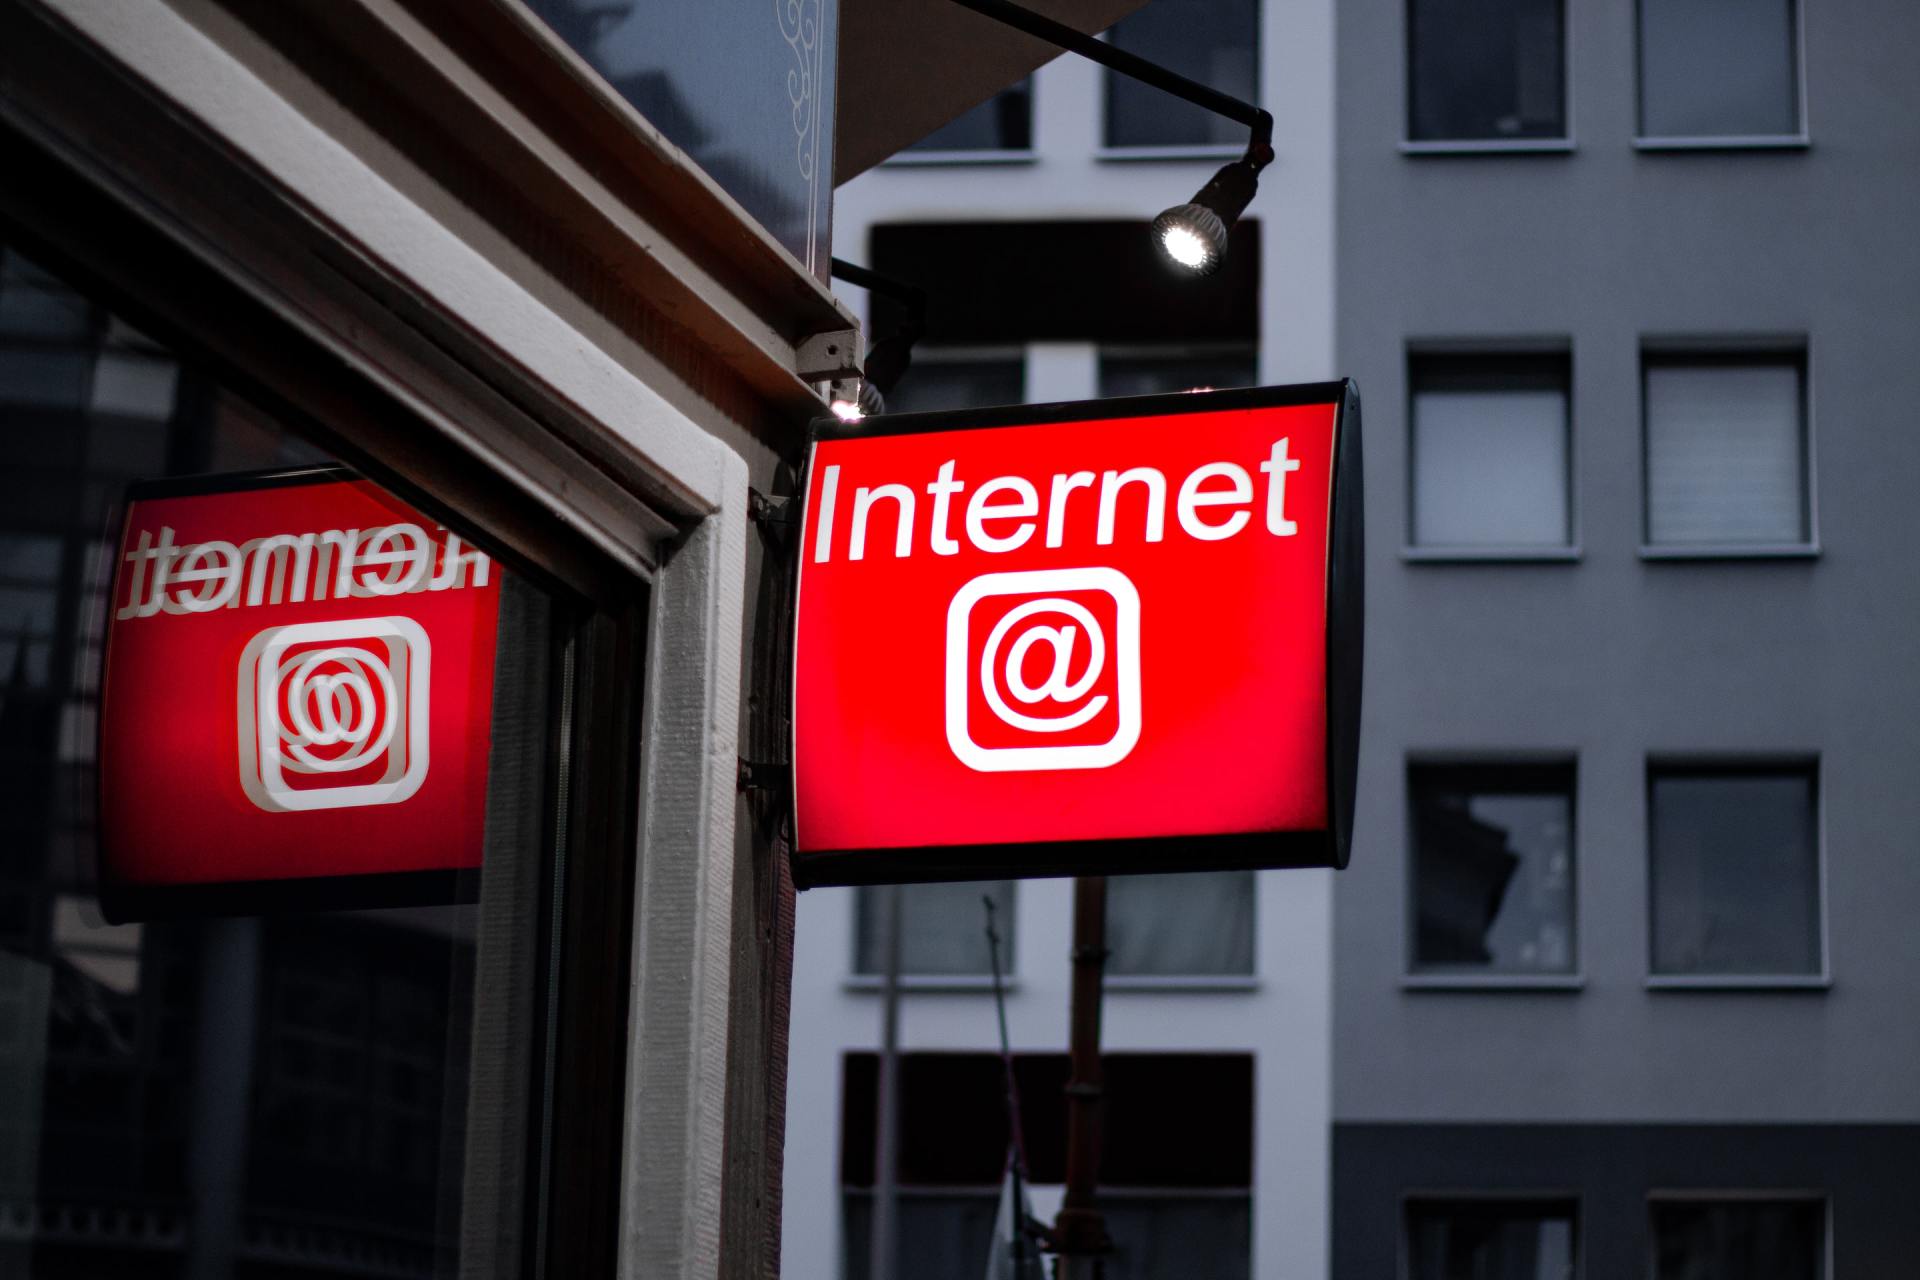 a red sign that says internet @ on it